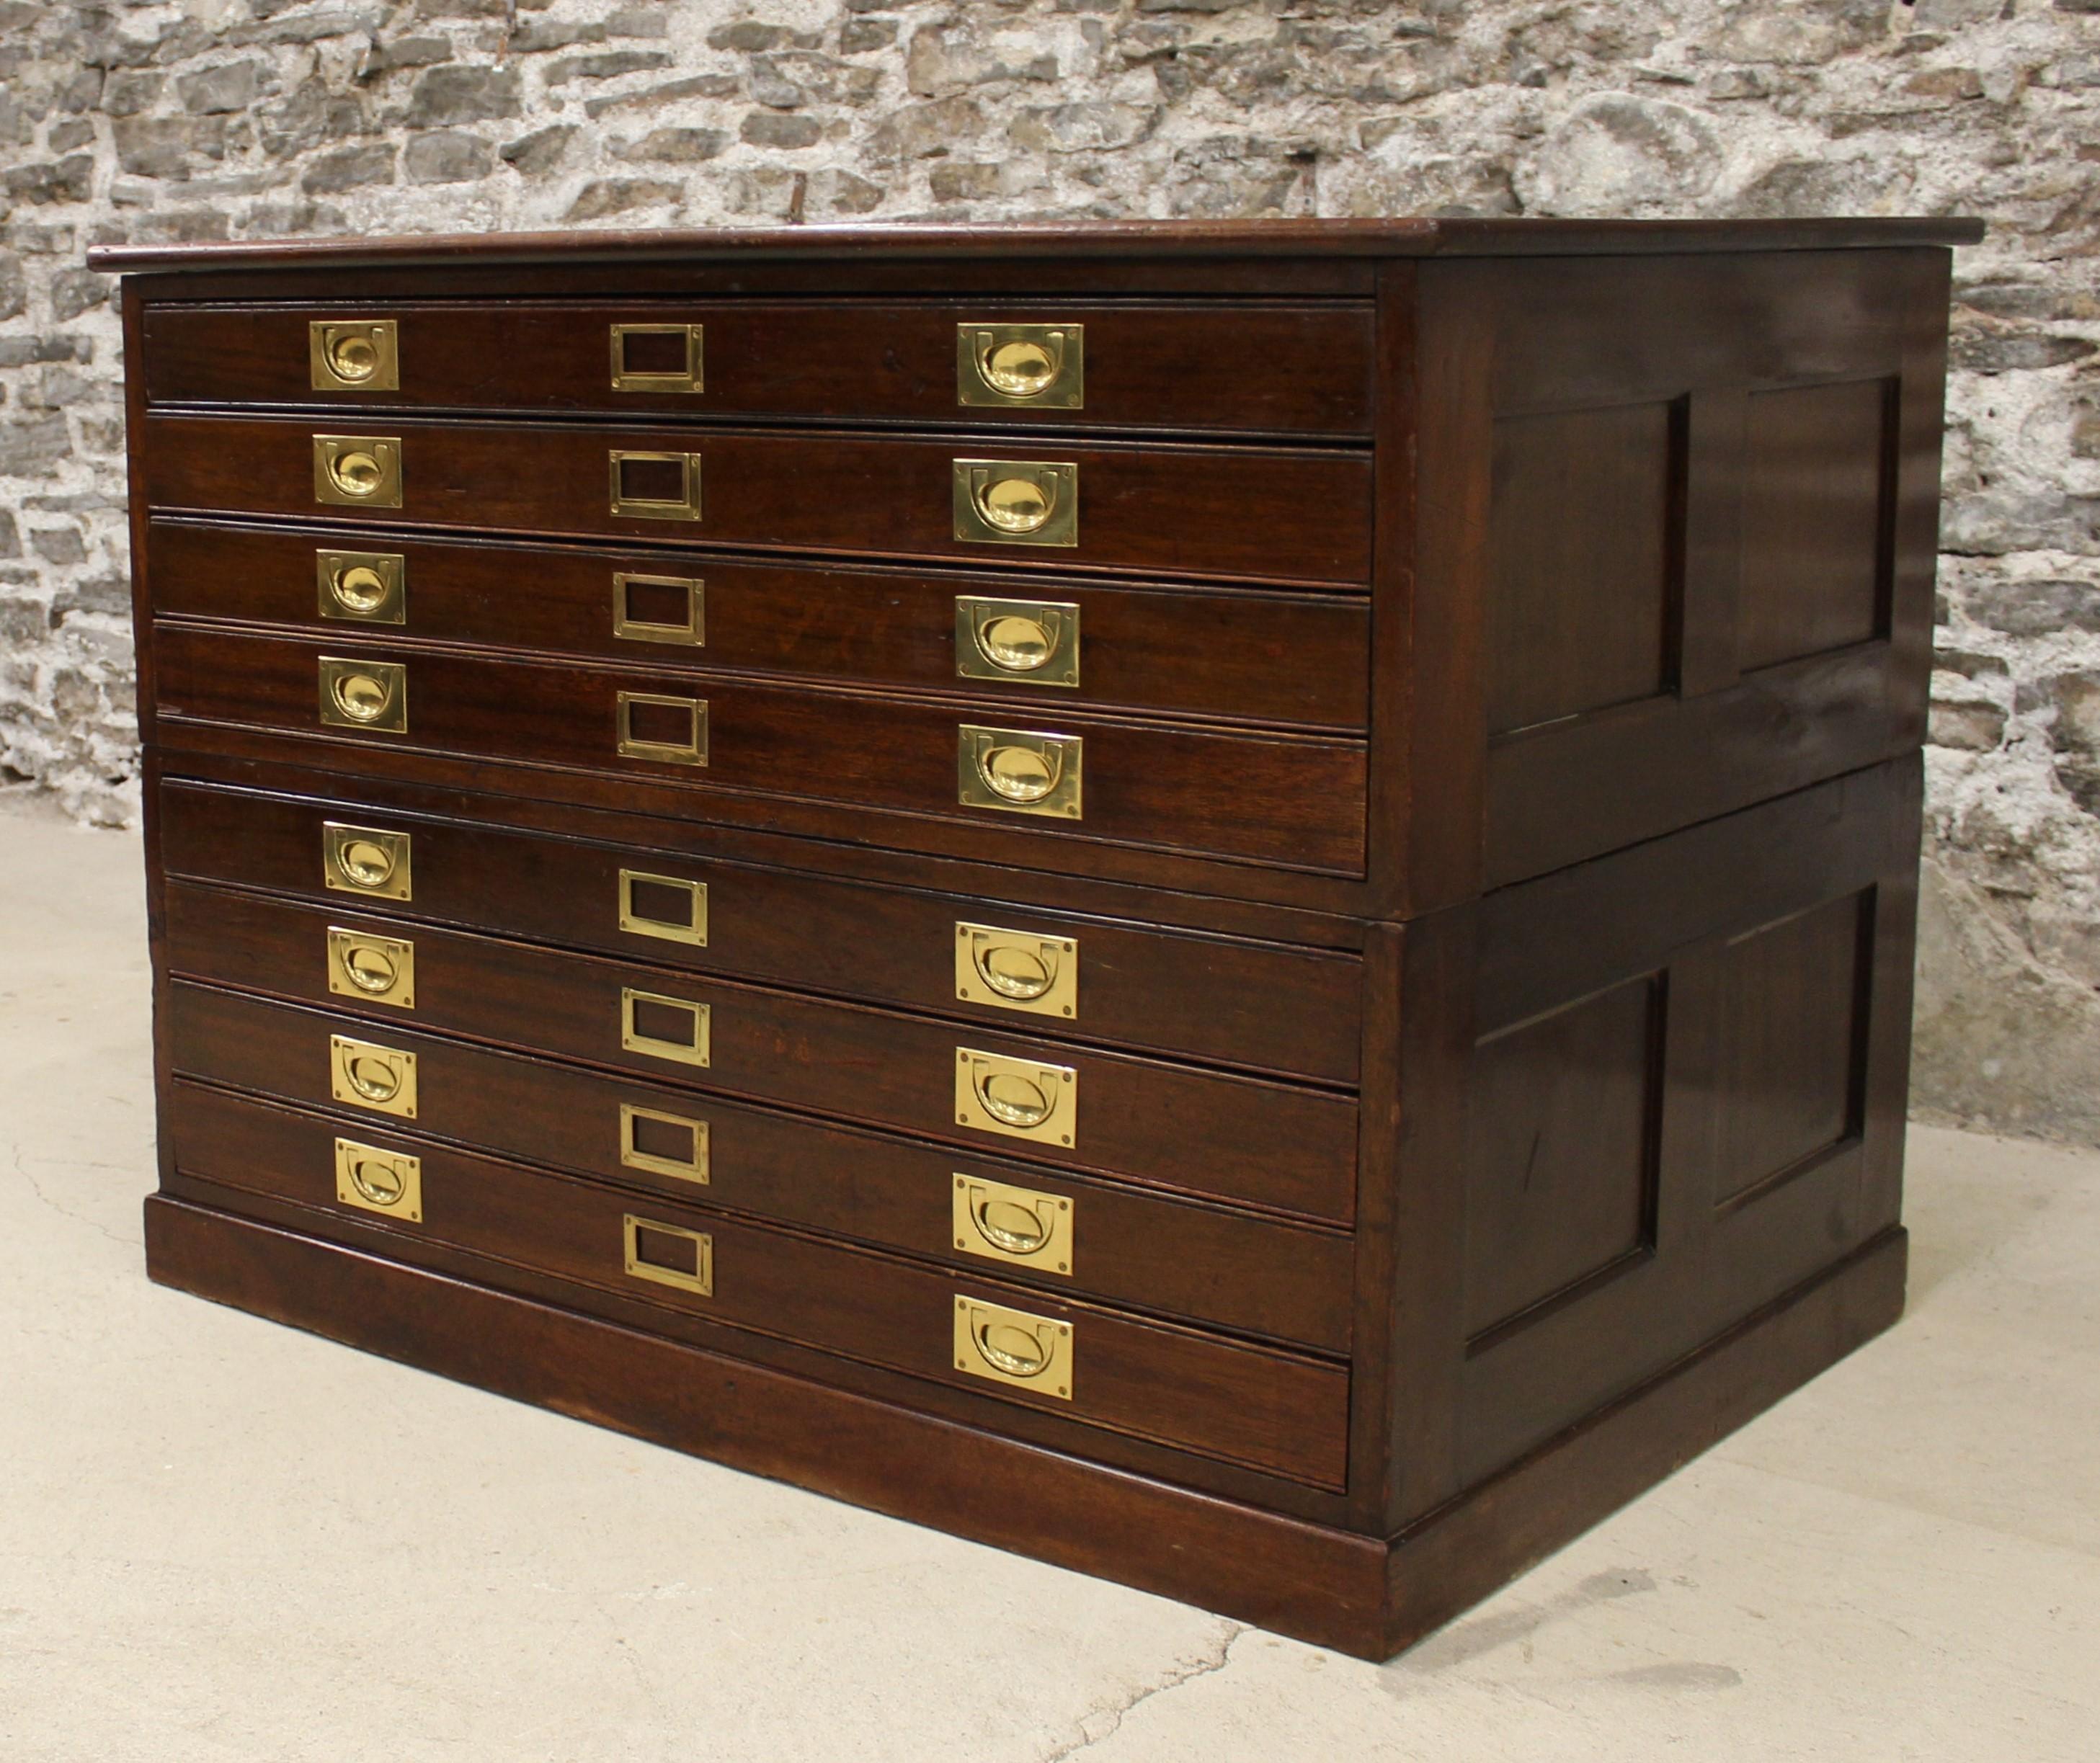 19th century mahogany Campaign map chest. This was built in two parts with square and fitted brass pulls with eight folio drawers.